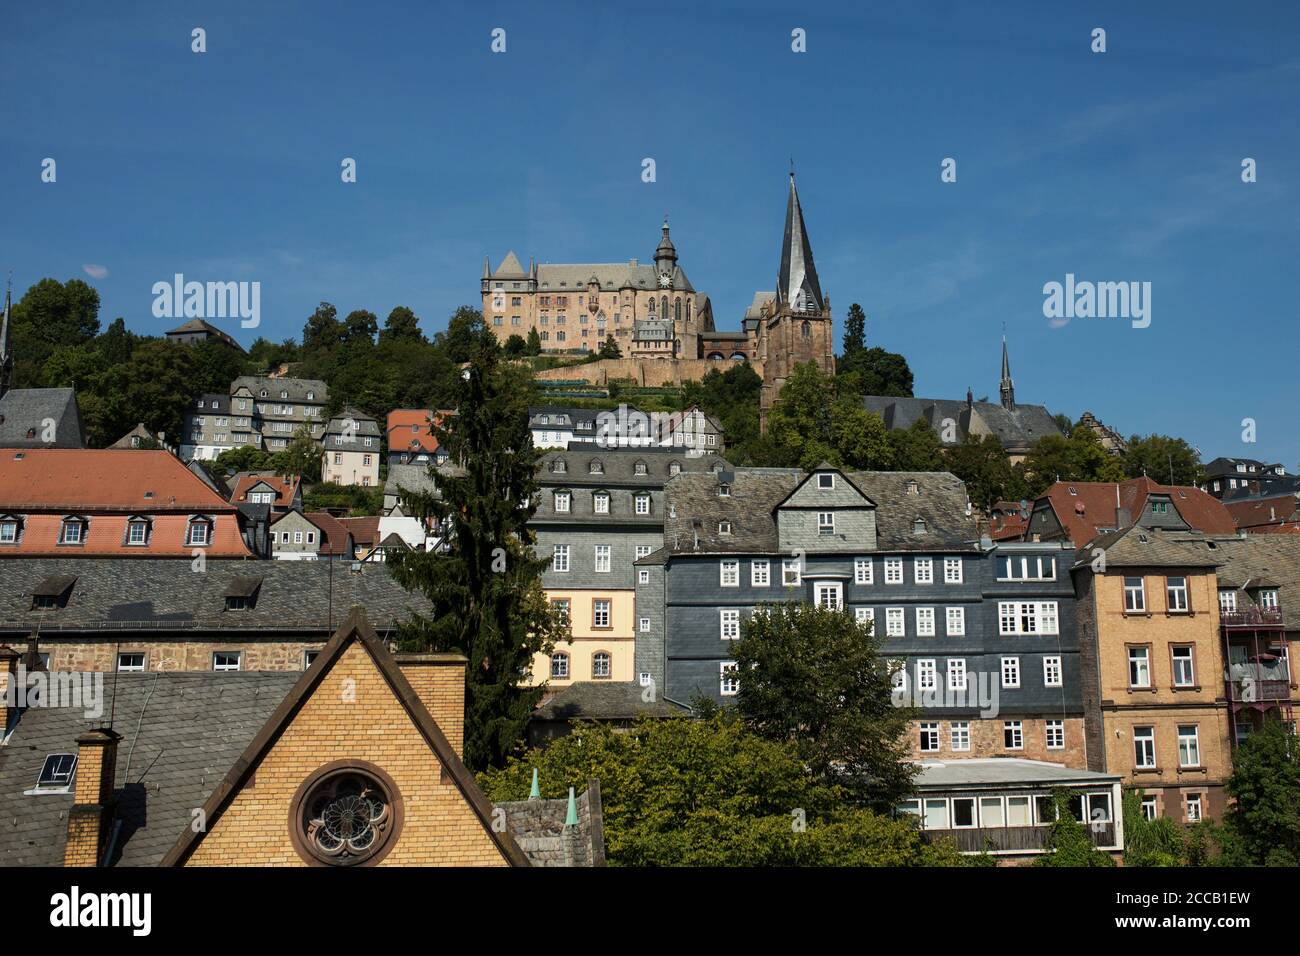 A view of the city of Marburg, Germany, with the Landgrafen Palace and St Mary's Lutheran church looking down from the hilltop. Stock Photo